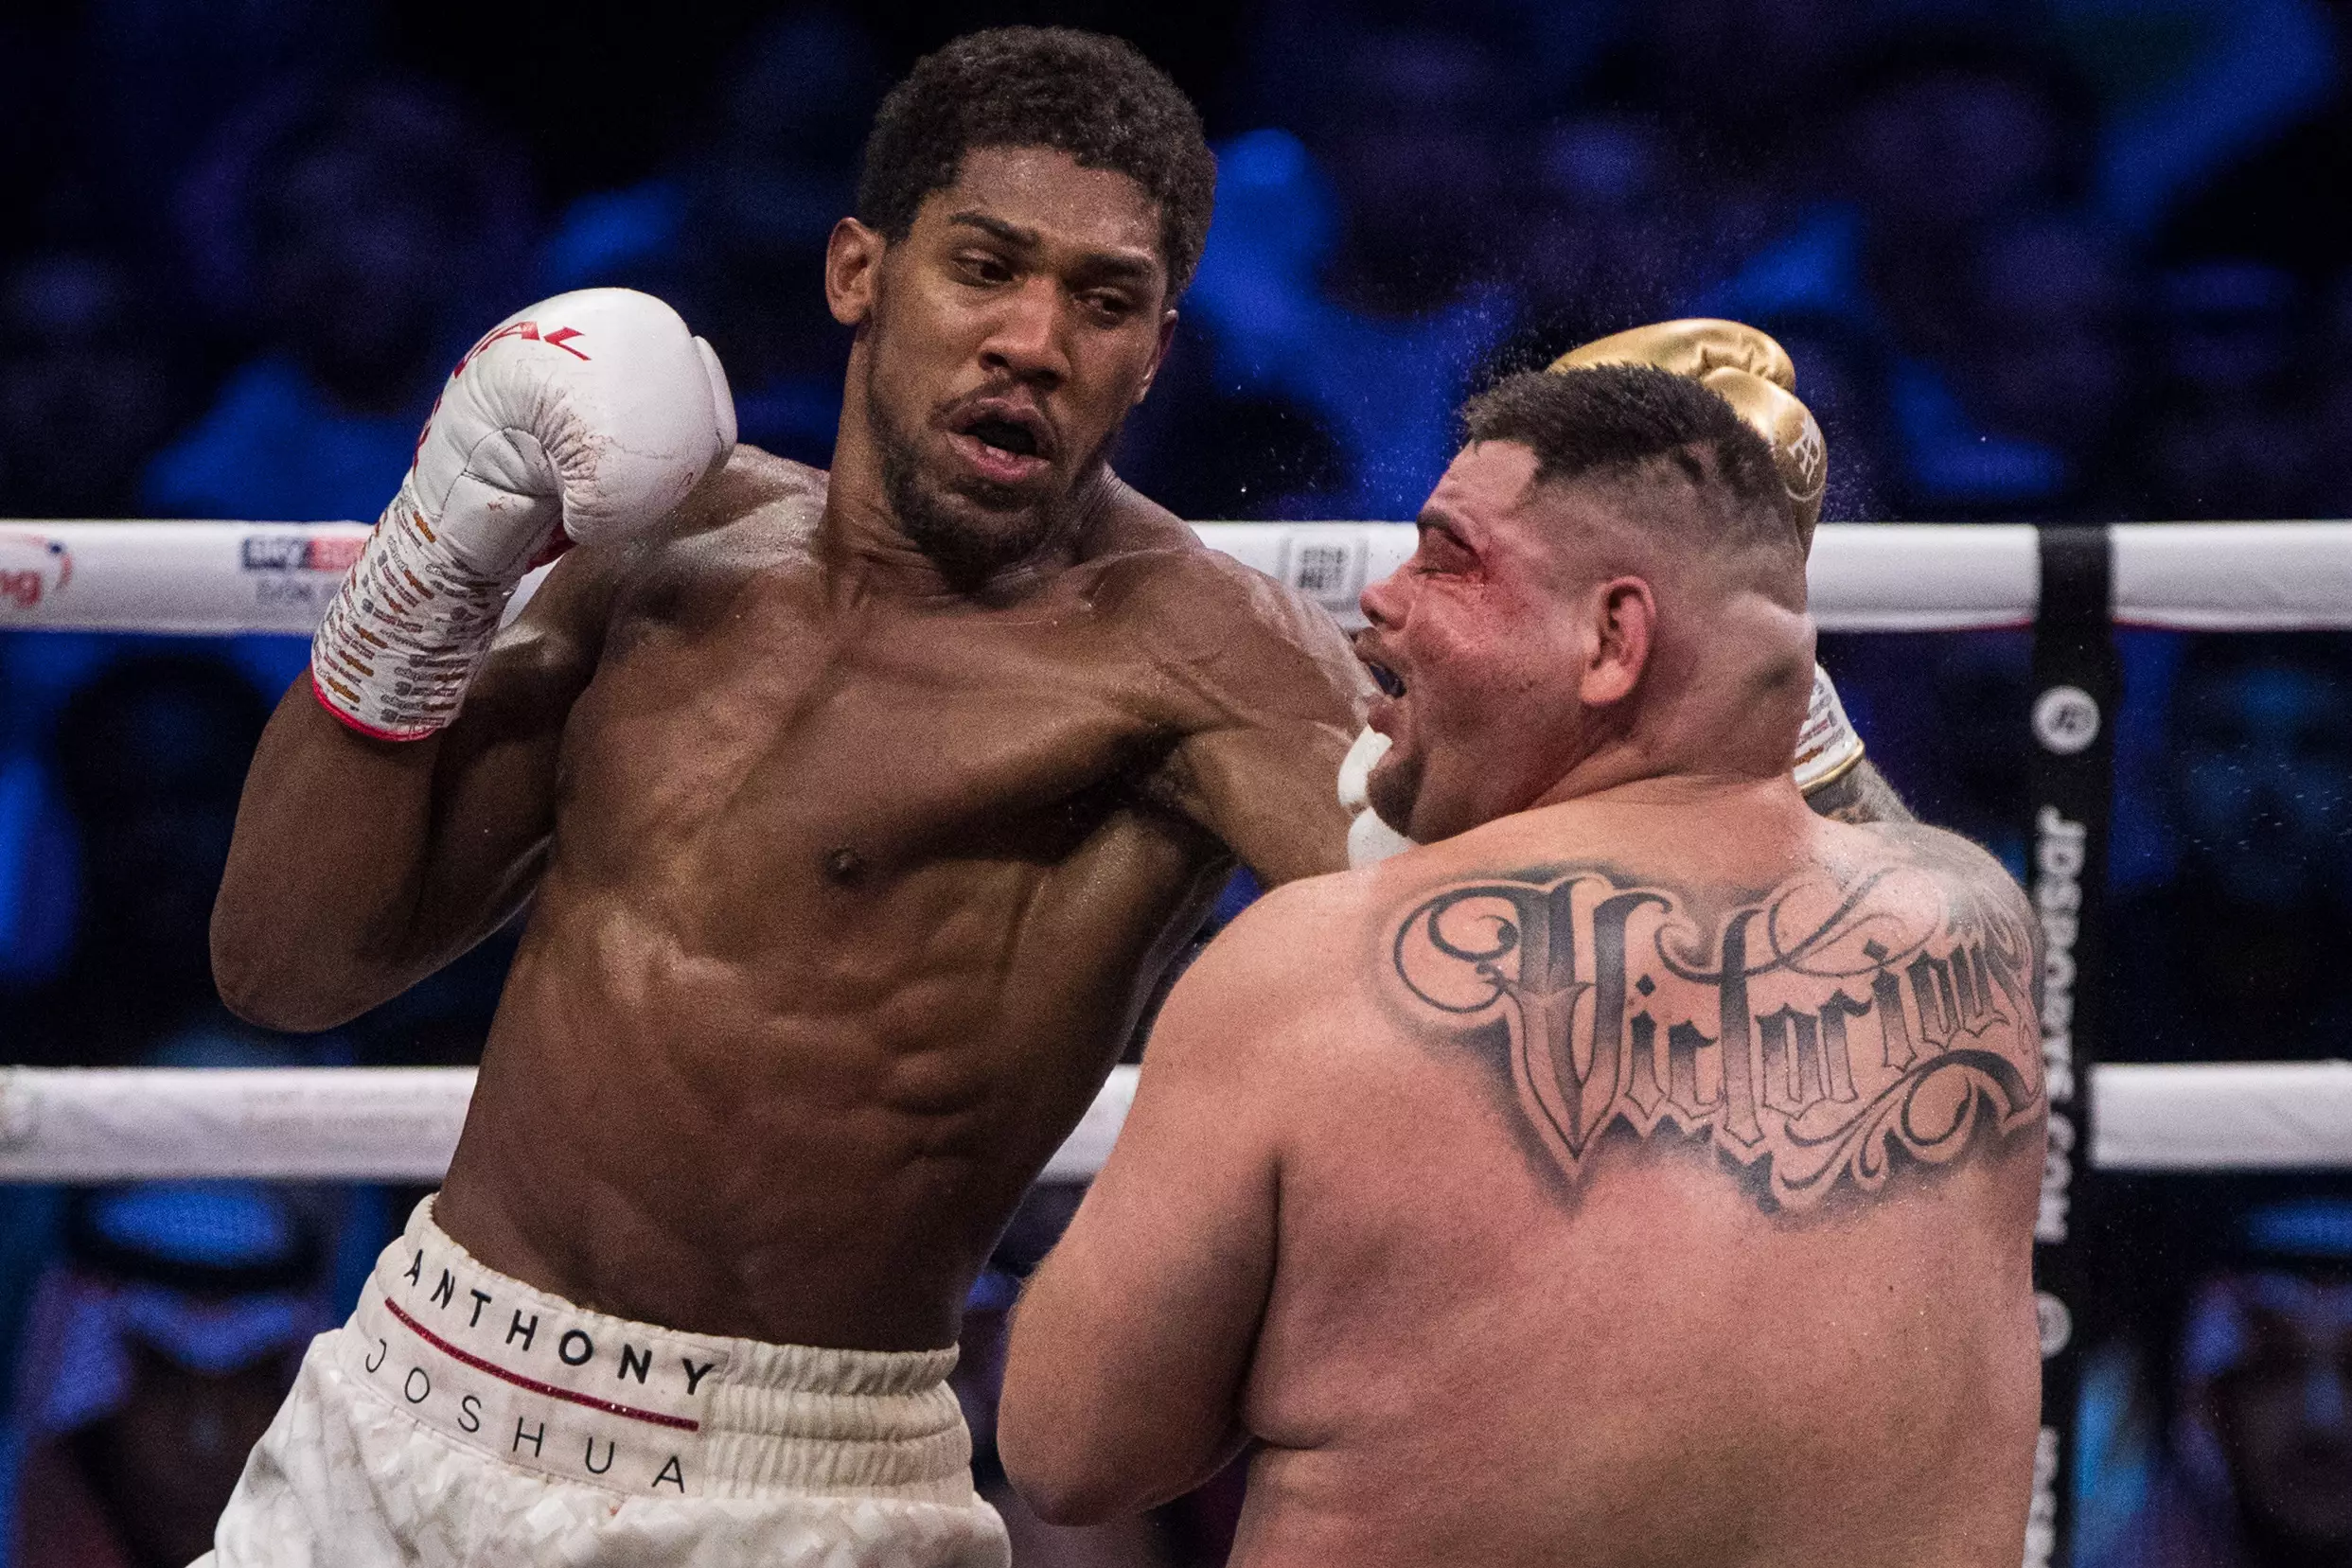 Joshua regained his titles from Andy Ruiz Jr in his last fight in December 2019. Image: PA Images